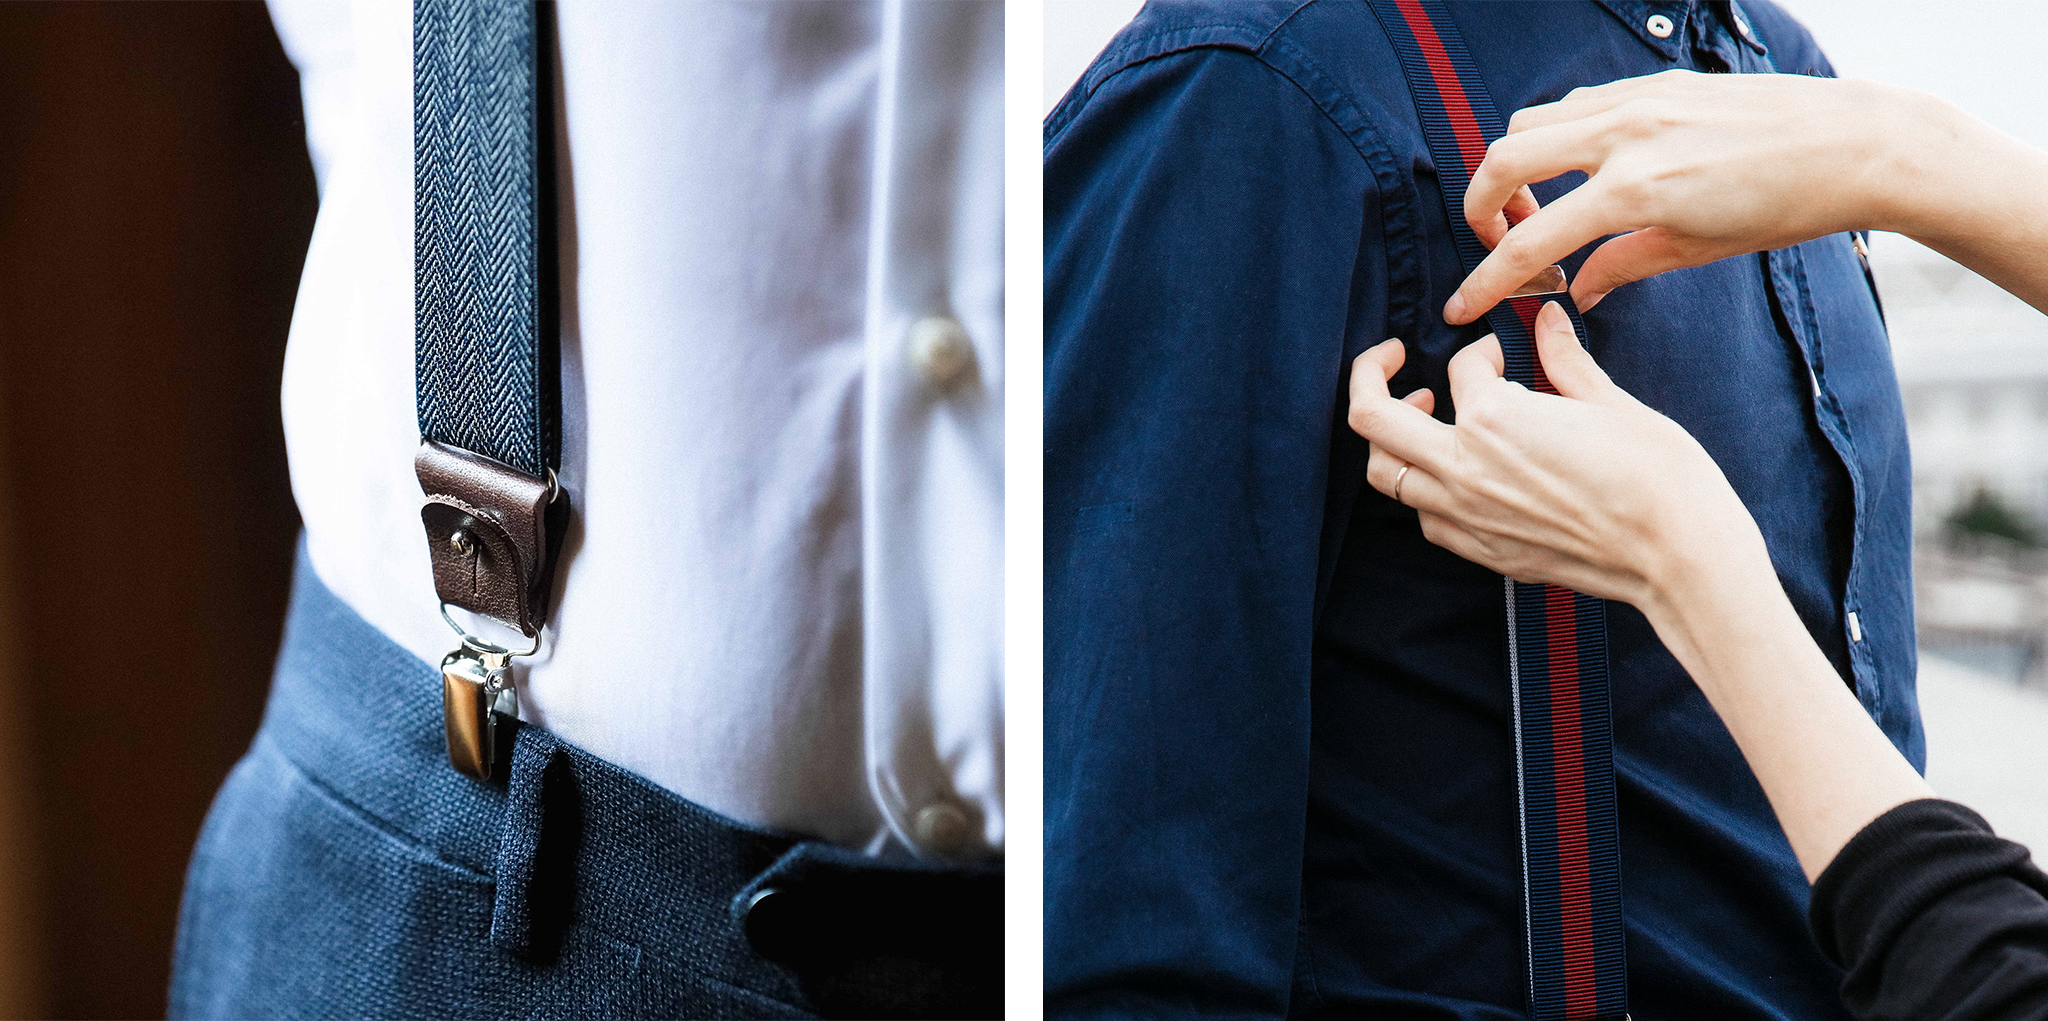 Braces or suspenders, the alternative to using a belt on your trousers!